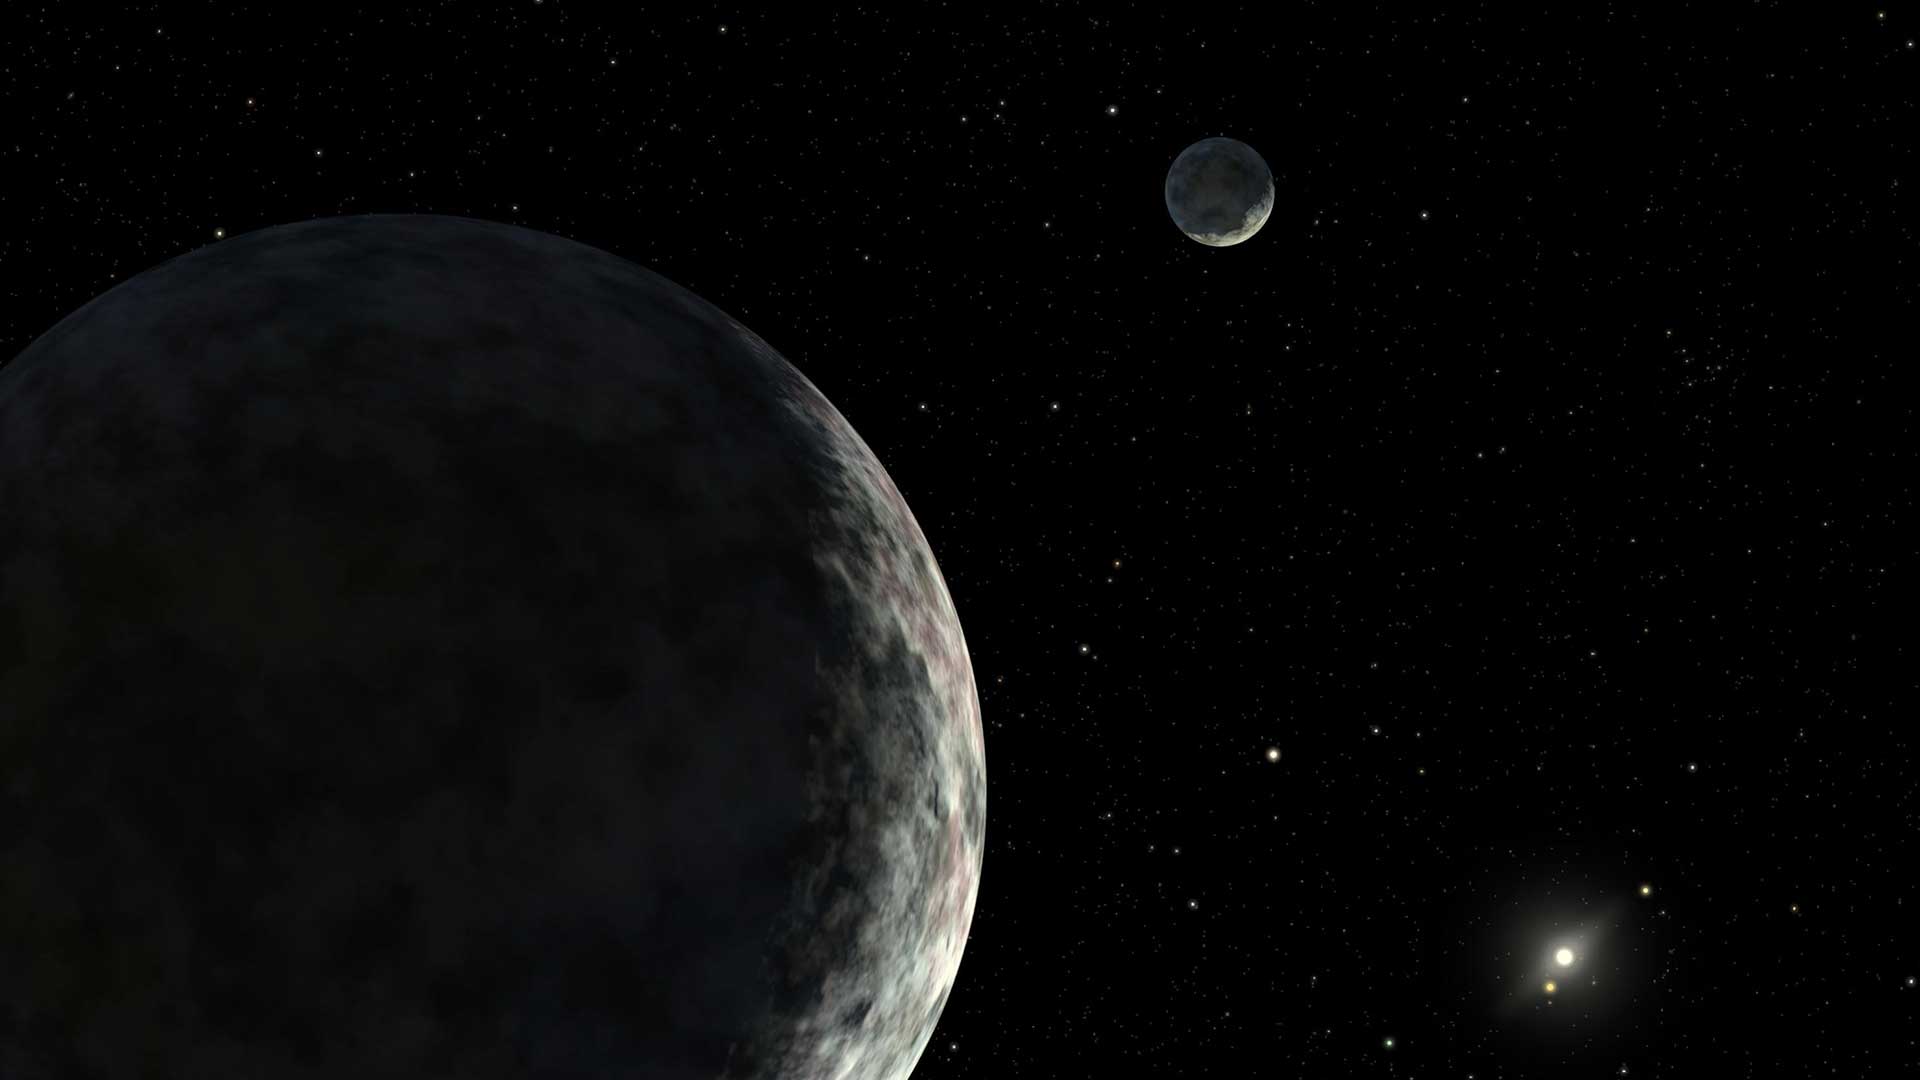 A gray planet with a distant moon, and a faraway Sun.